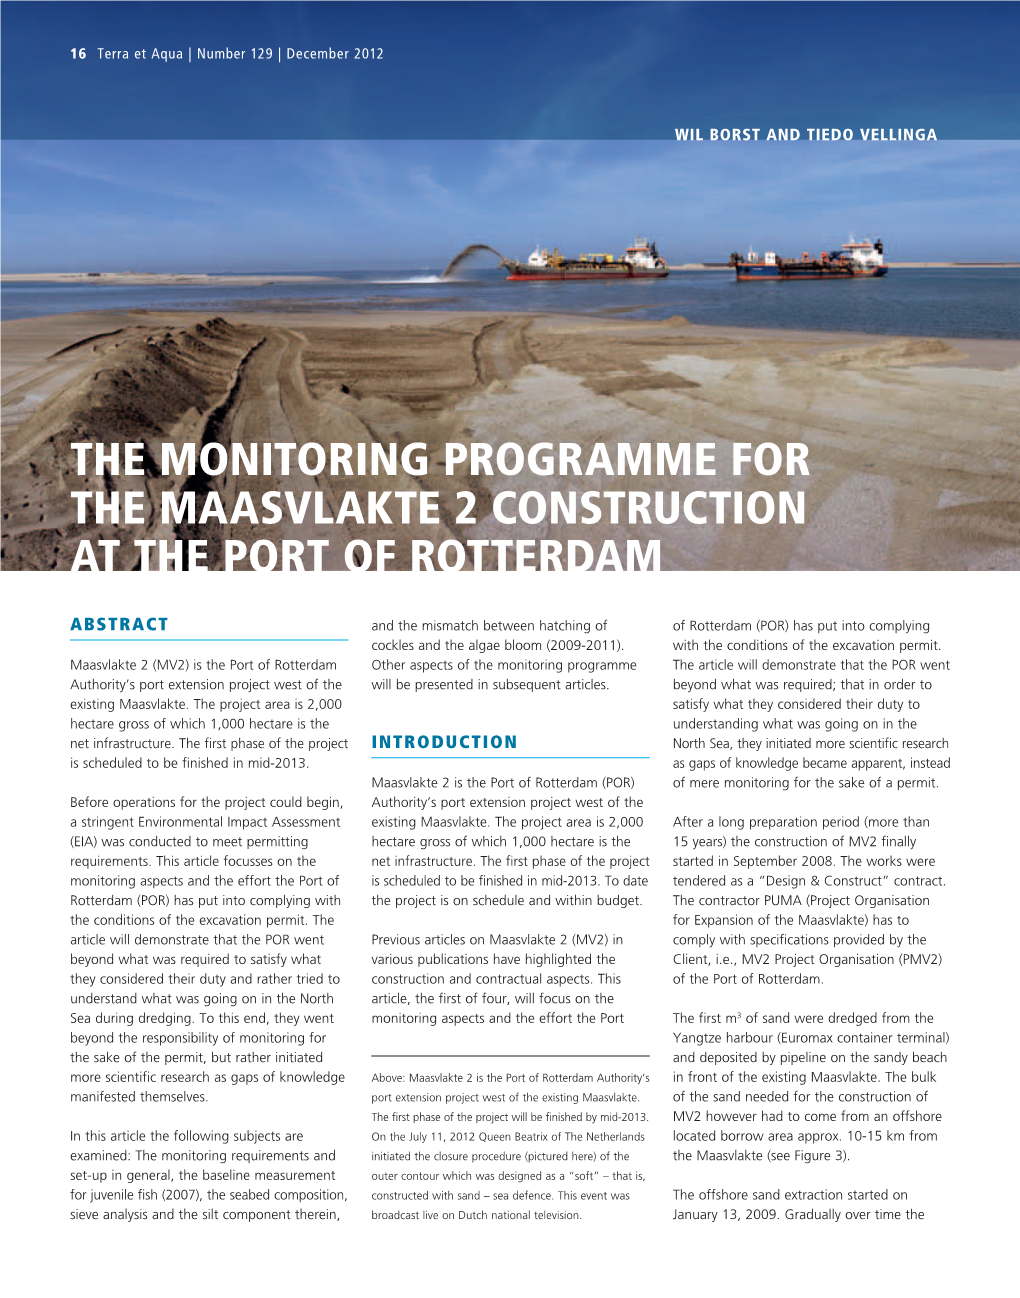 The Monitoring Programme for the Maasvlakte 2 Construction at the Port of Rotterdam